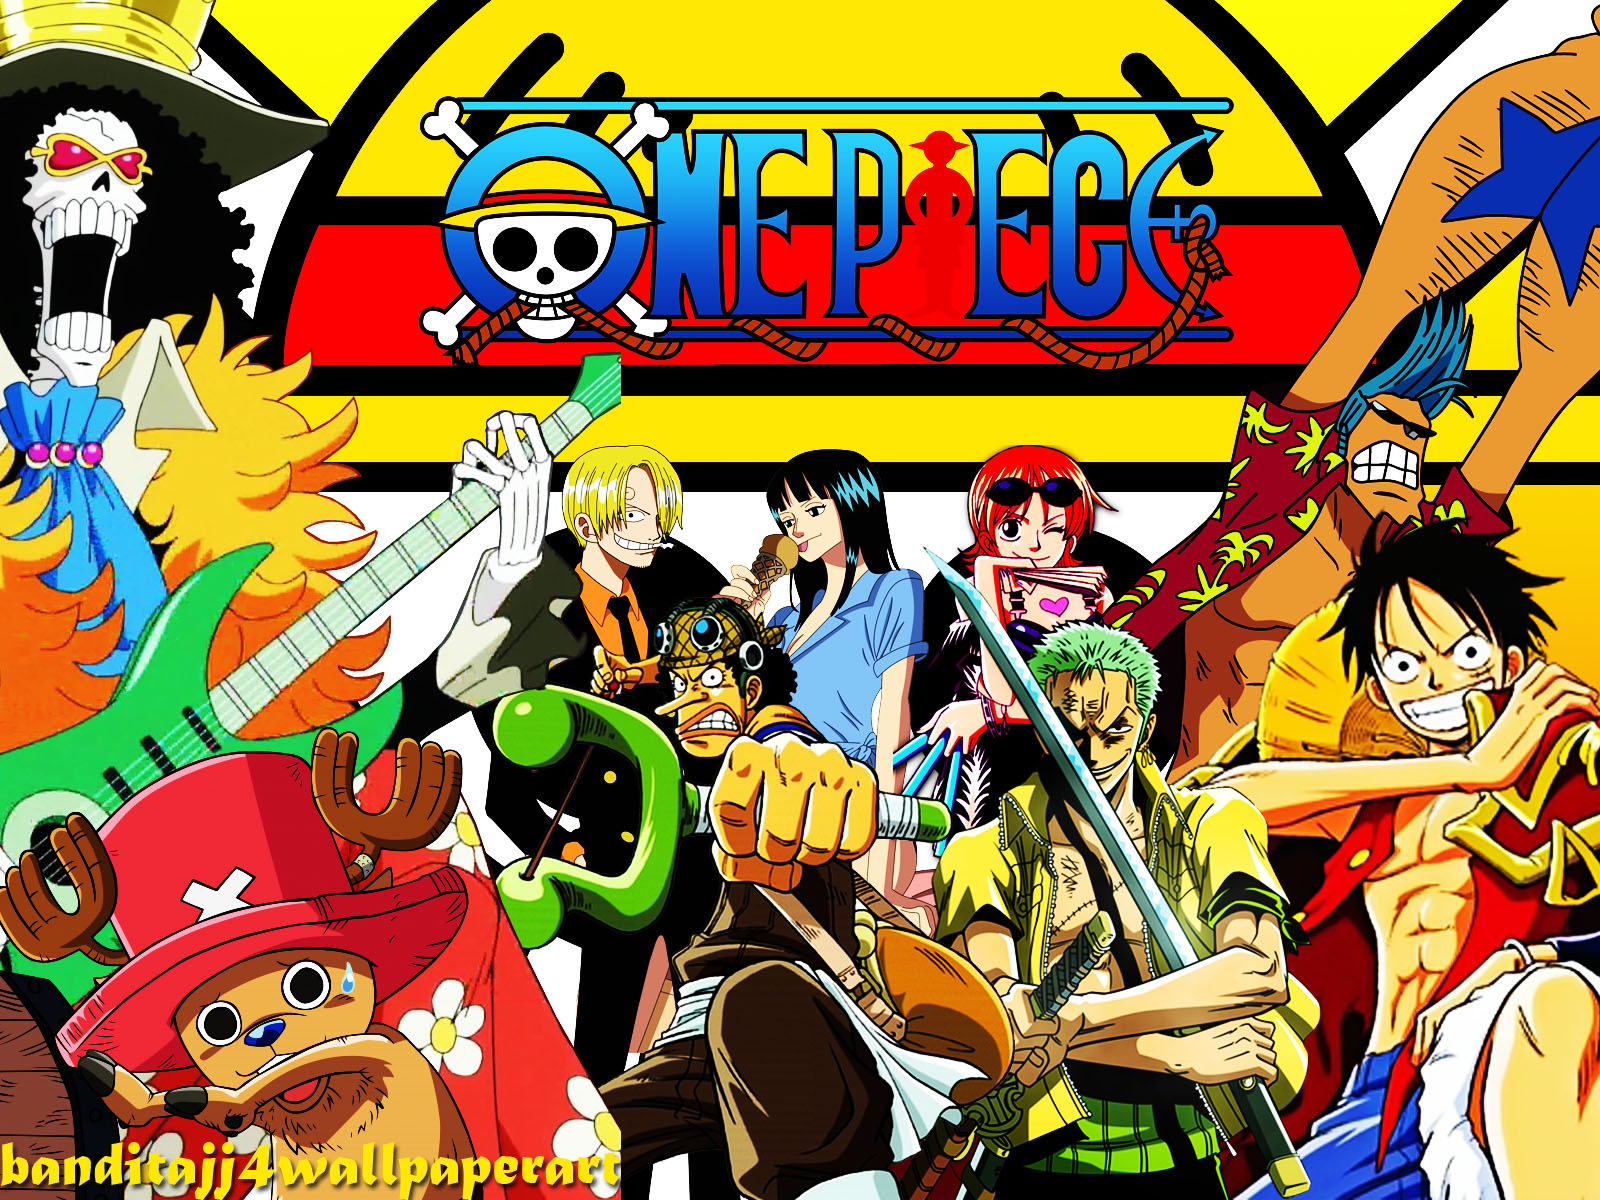 Free Download Wallpaper Colorfull Wallpapers Place - One Piece - HD Wallpaper 